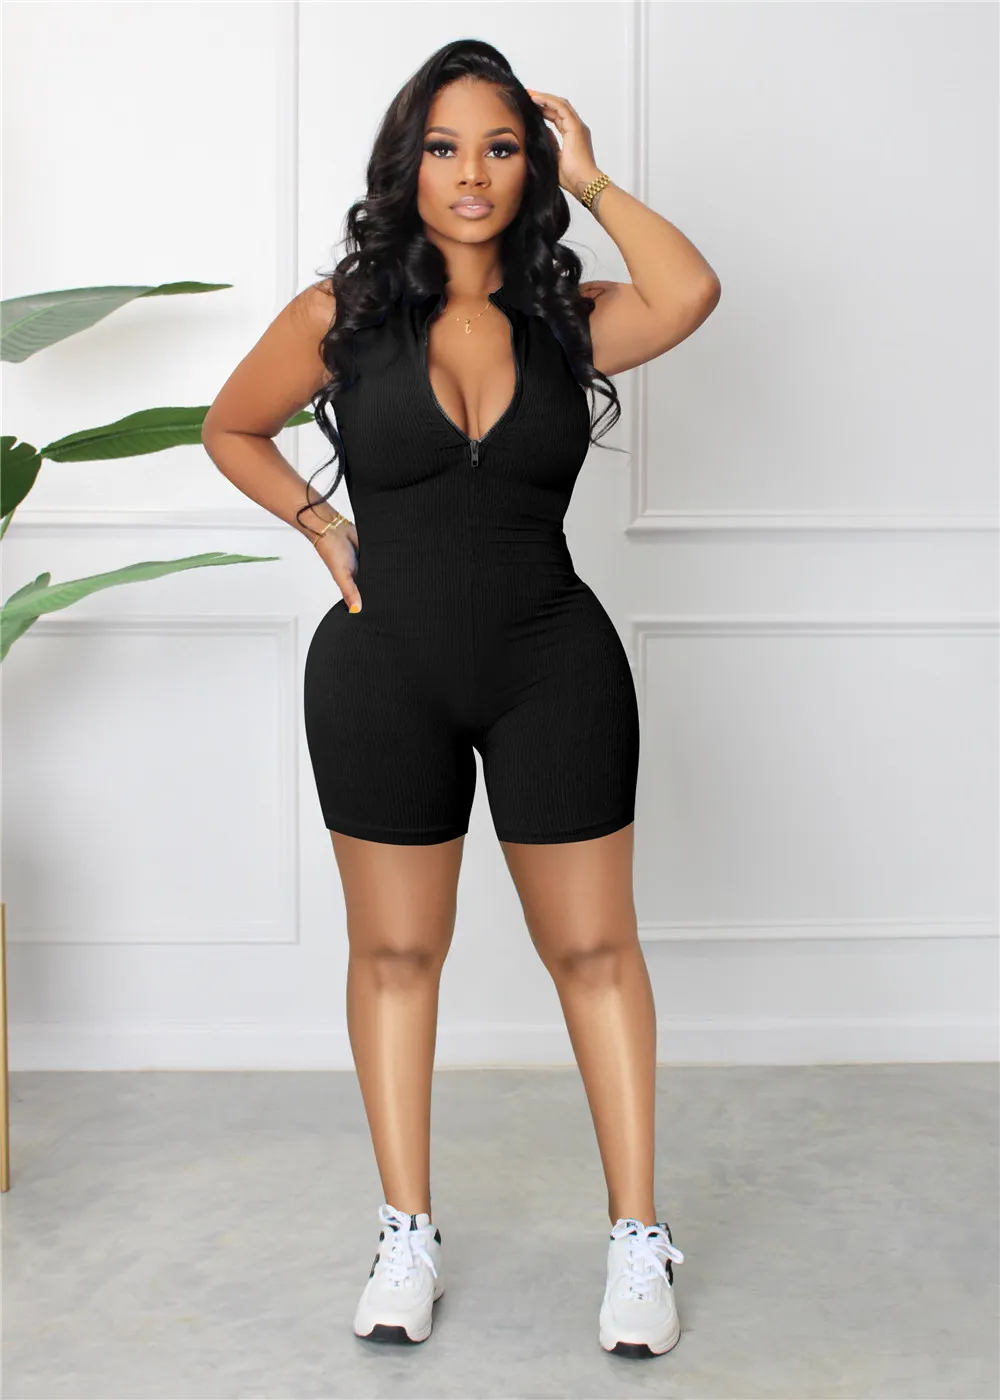 Designer Ribbed Rompers Summer Women Sleeveless Jumpsuits Casual Solid Zipper Bodycon Playsuits One Piece Overalls Bulk Items Wholesale Clothes 9415